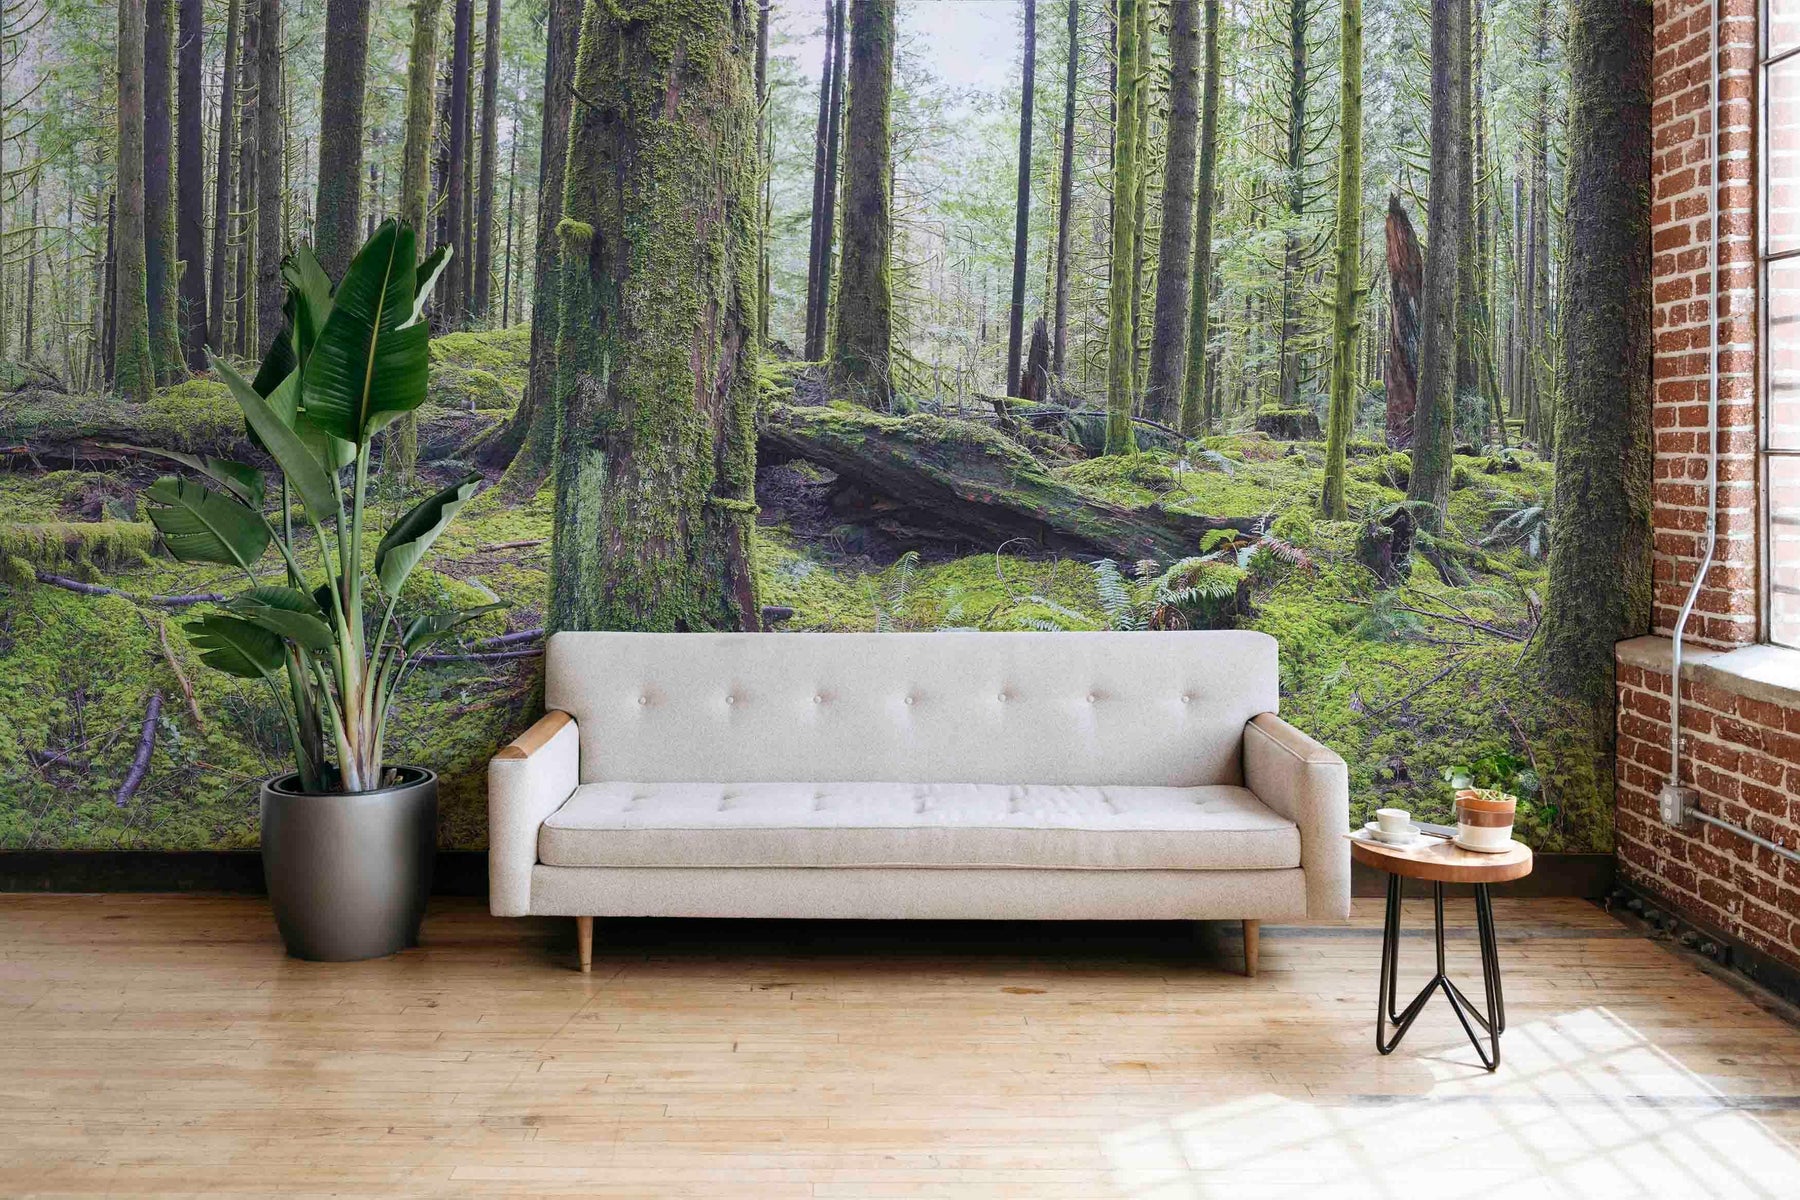 Mountain Pine Forest Landscape Wall Mural Living Room Decor Self